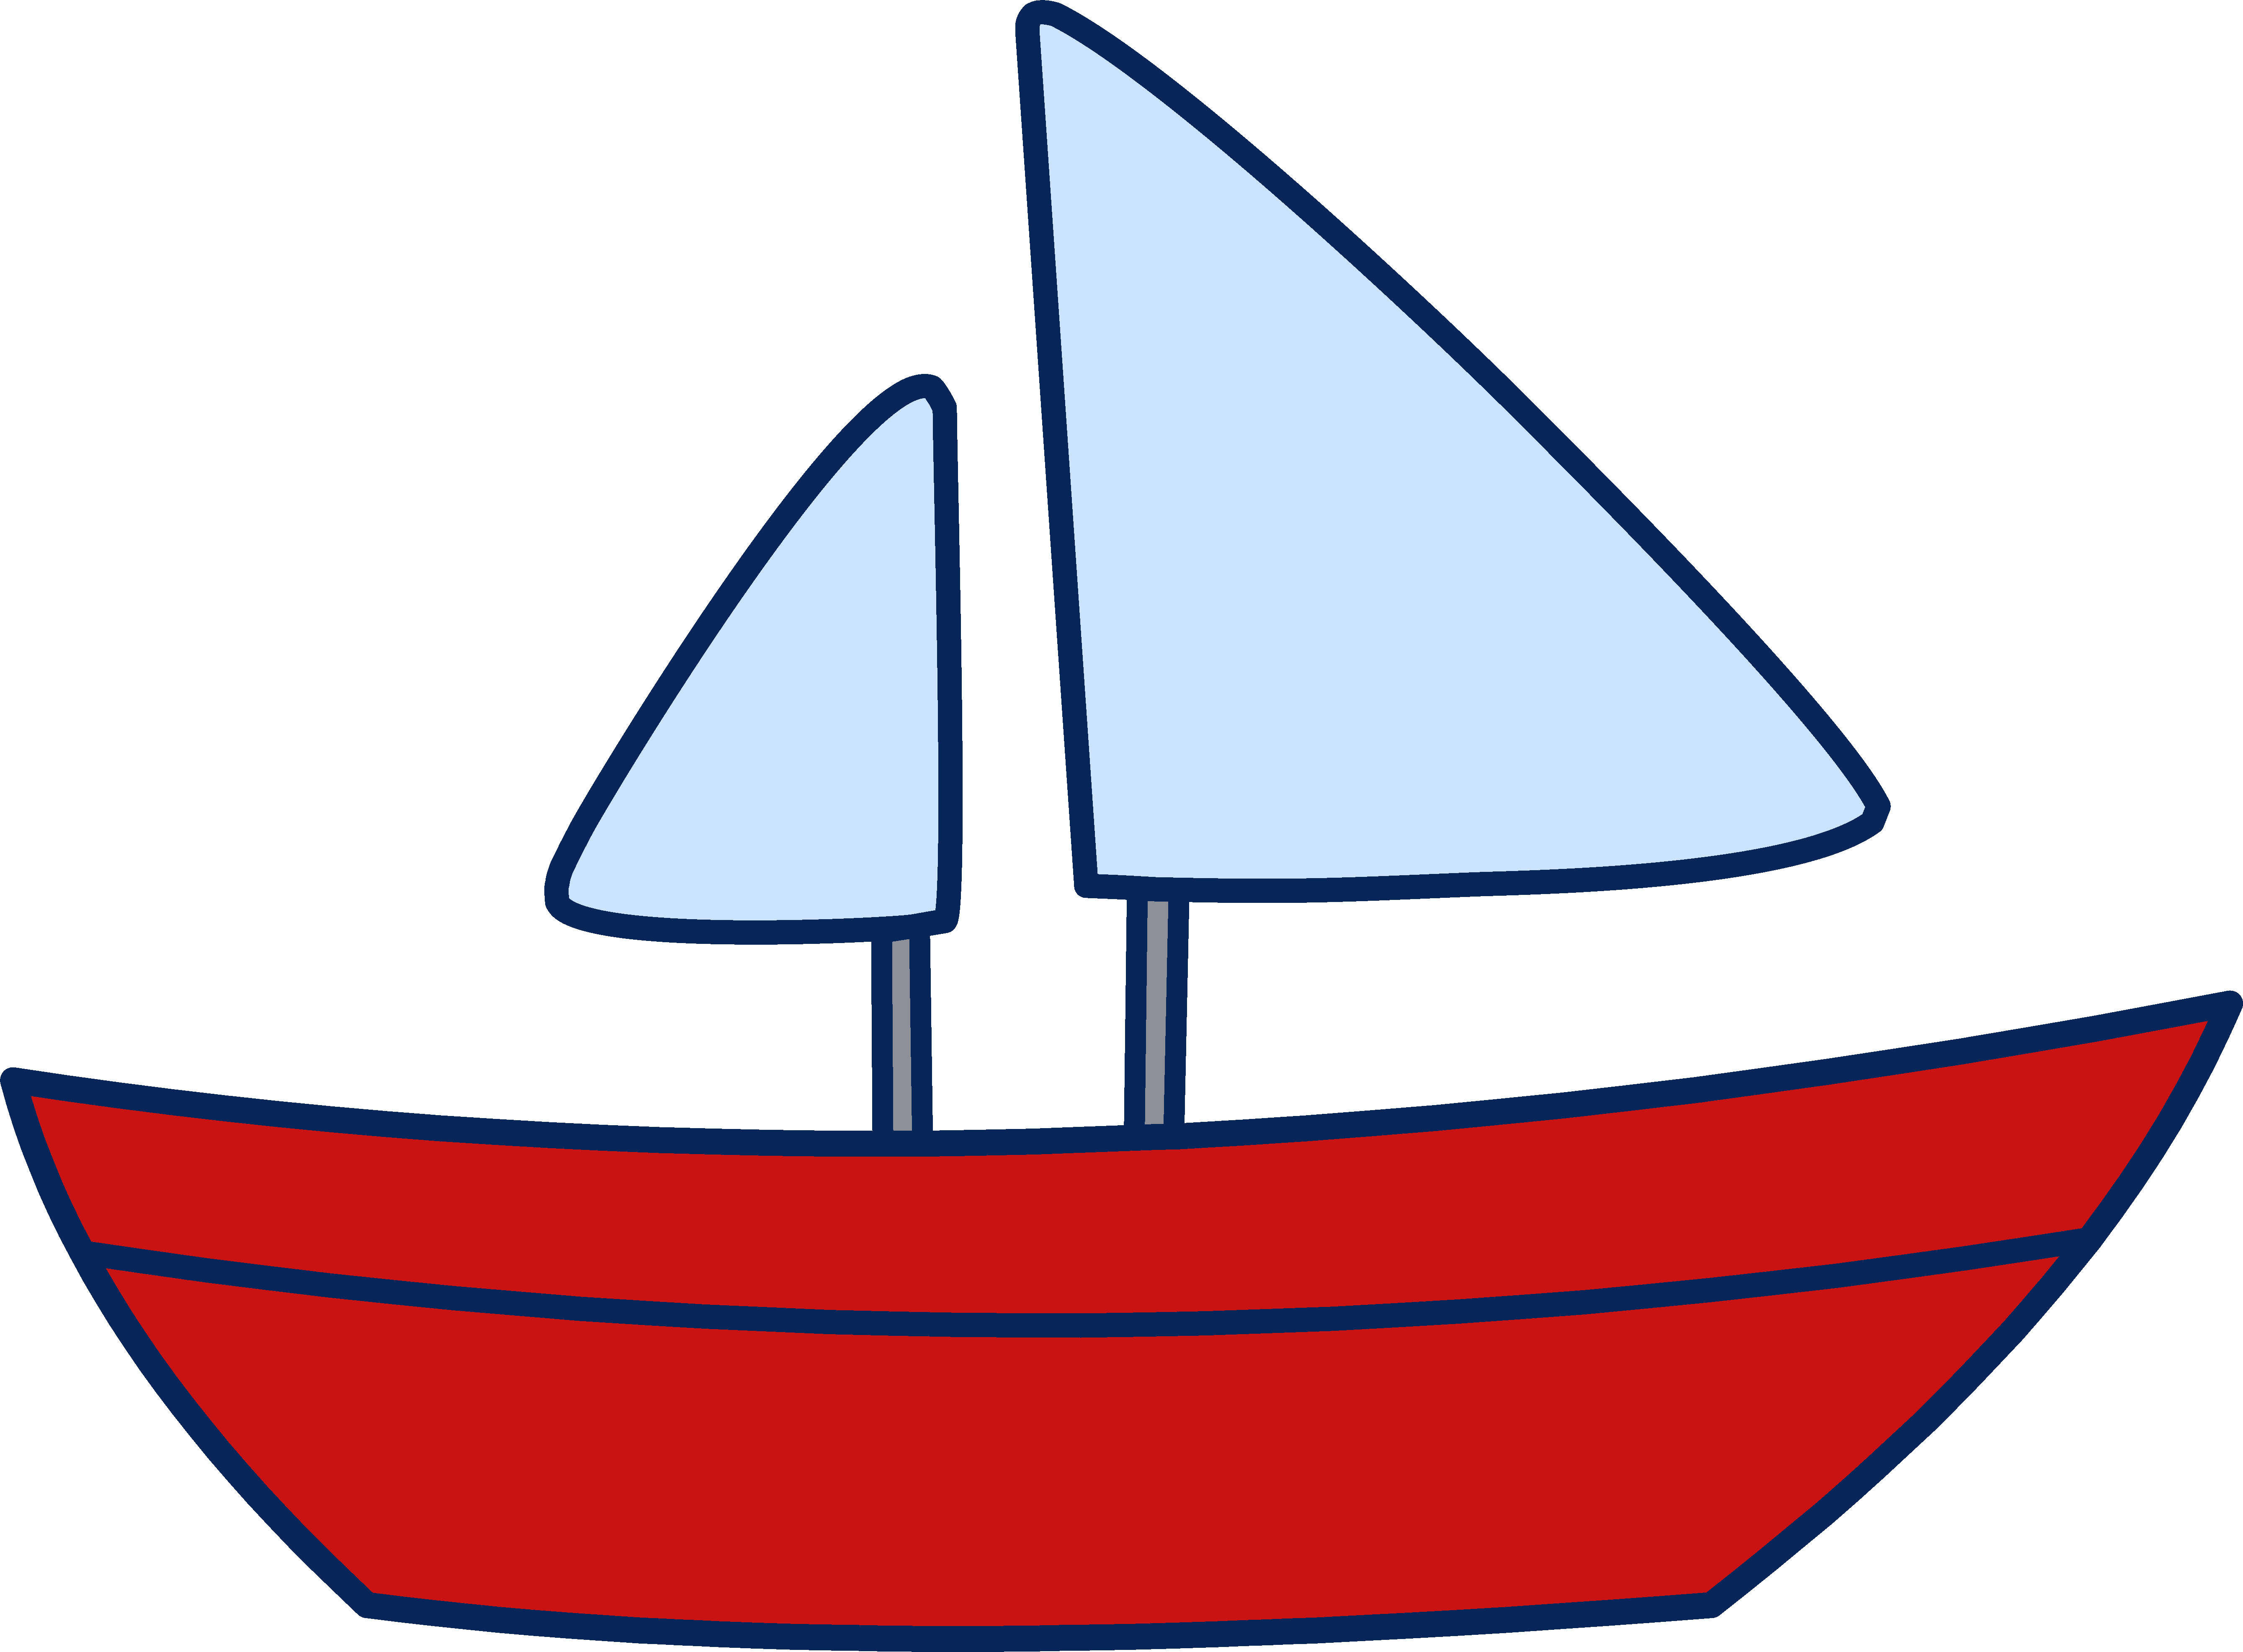 Images For Row Boat Clip Art - Boat Images Clip Art